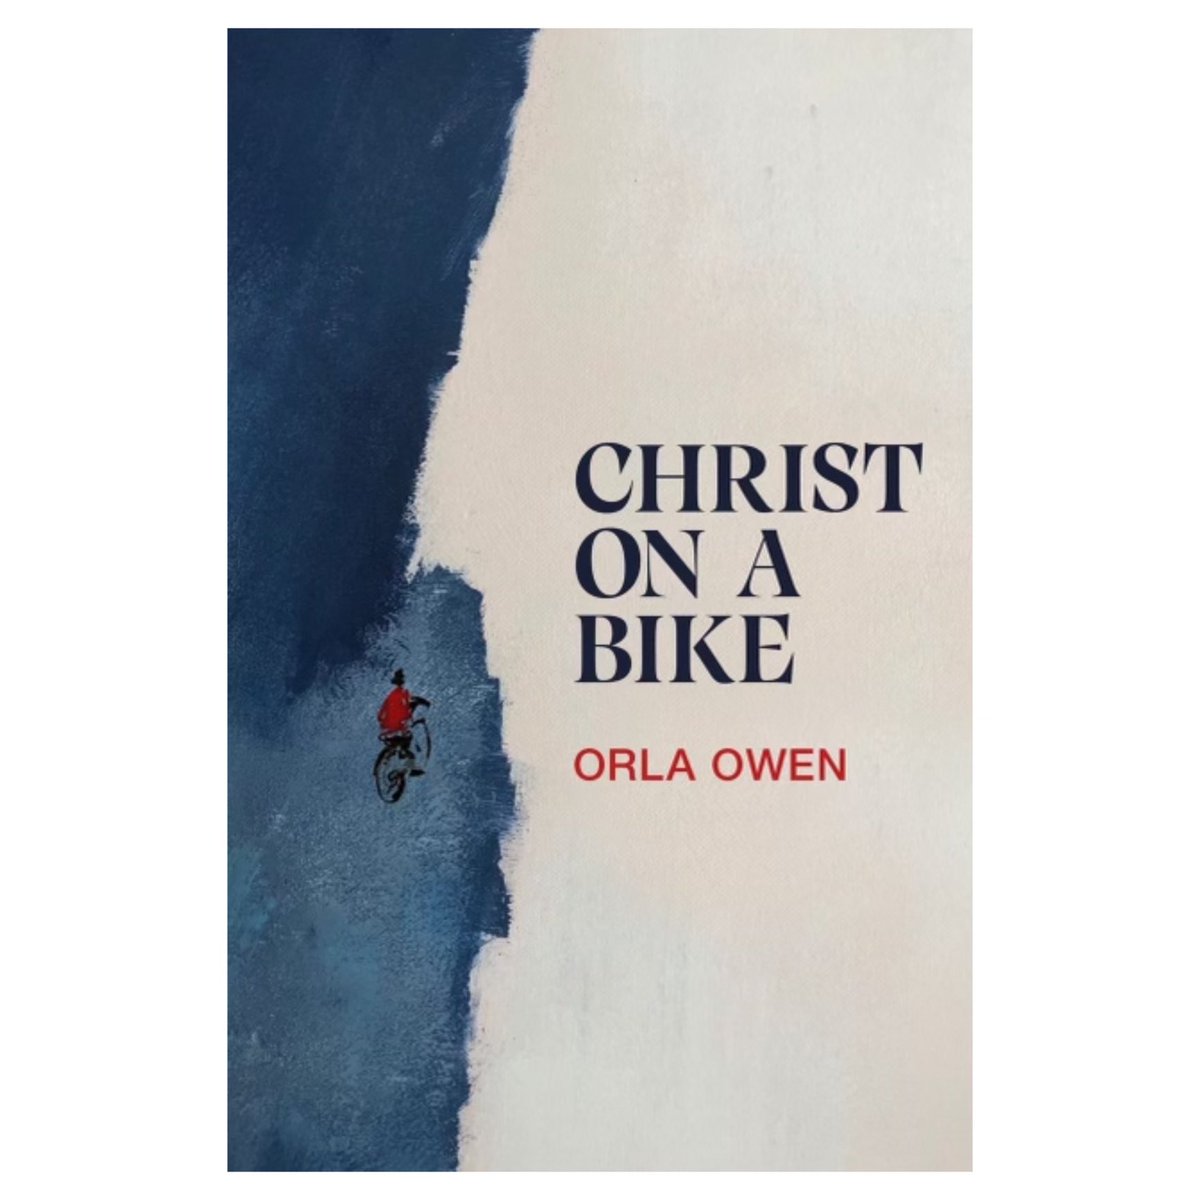 Just had great chats with the wonderful @shawnmooney about #ChristOnABike & #TheLostThumb & reading & writing. An absolute joy. Thank you @CauveryMadhavan for kind of introducing us! 💙❤️💙 #books #BookTwitter #booktwt #PAH